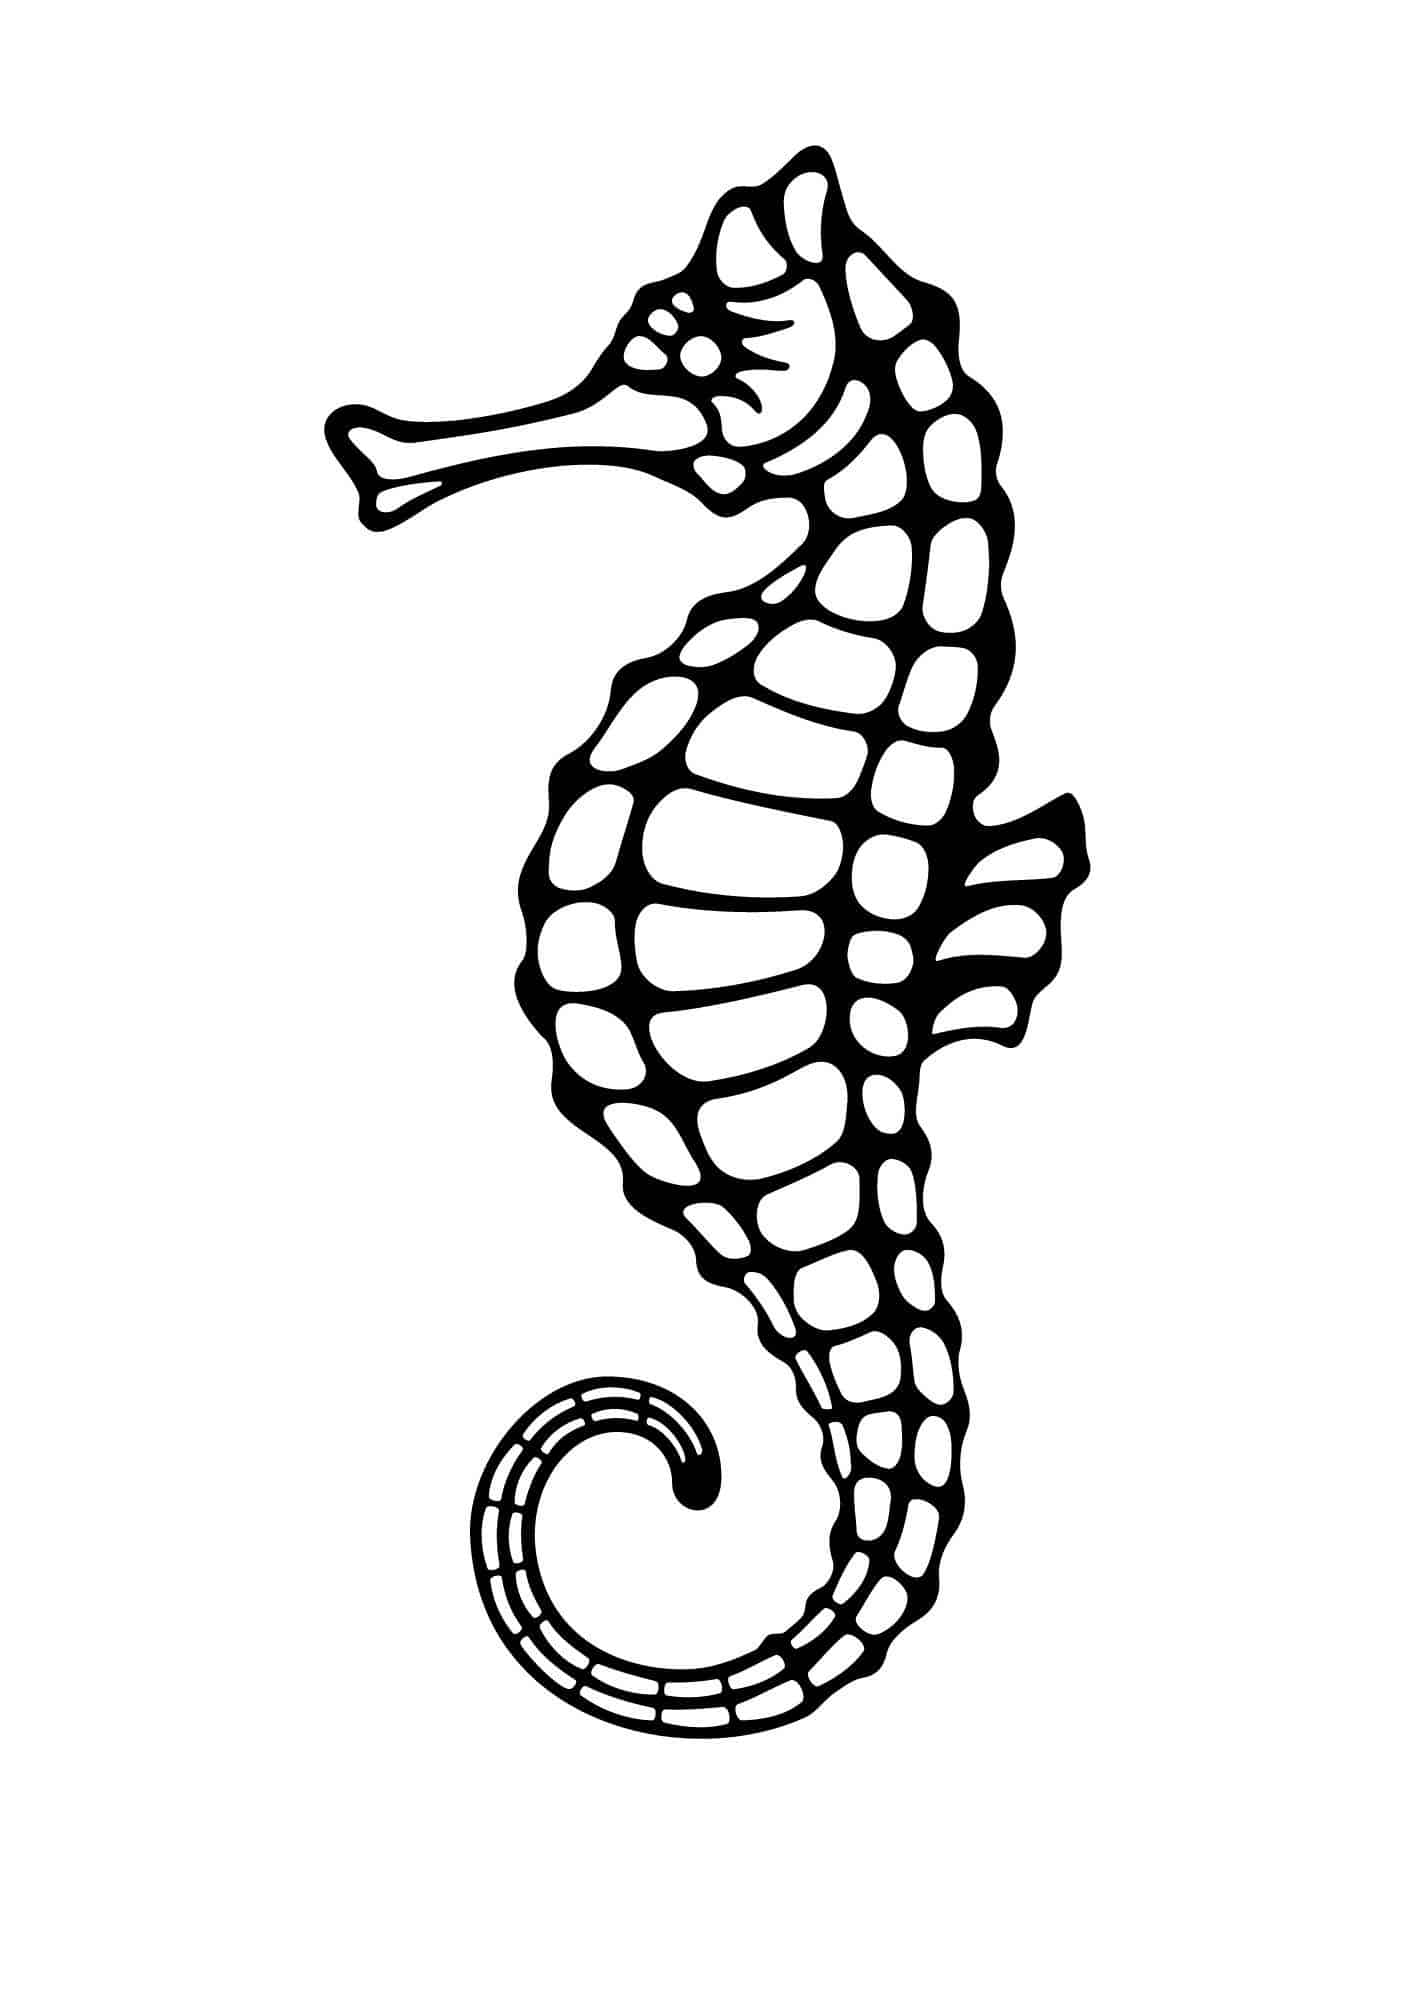 Looking For a Magical Seahorse Template? 9 FREE Seahorse Printables for ...